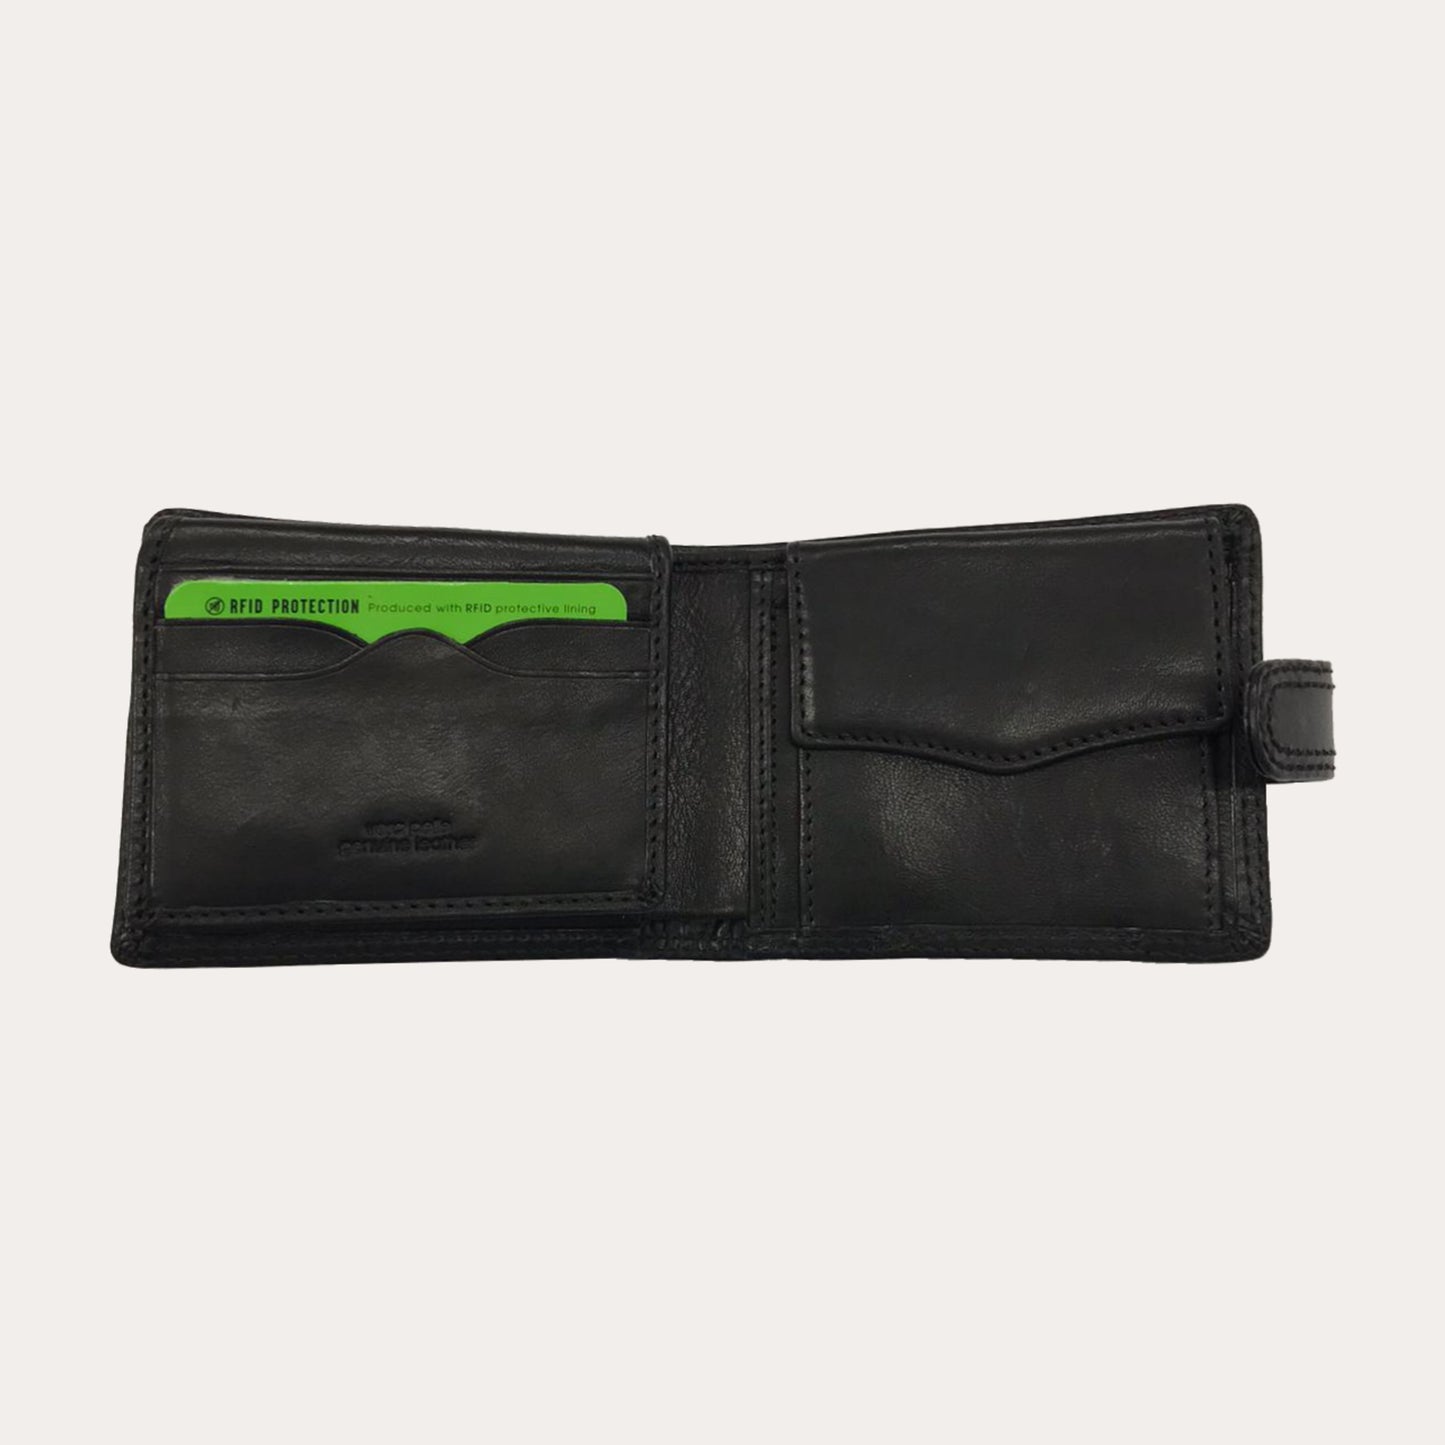 Gianni Conti Black Leather Wallet-7 Credit Card/Coin Section